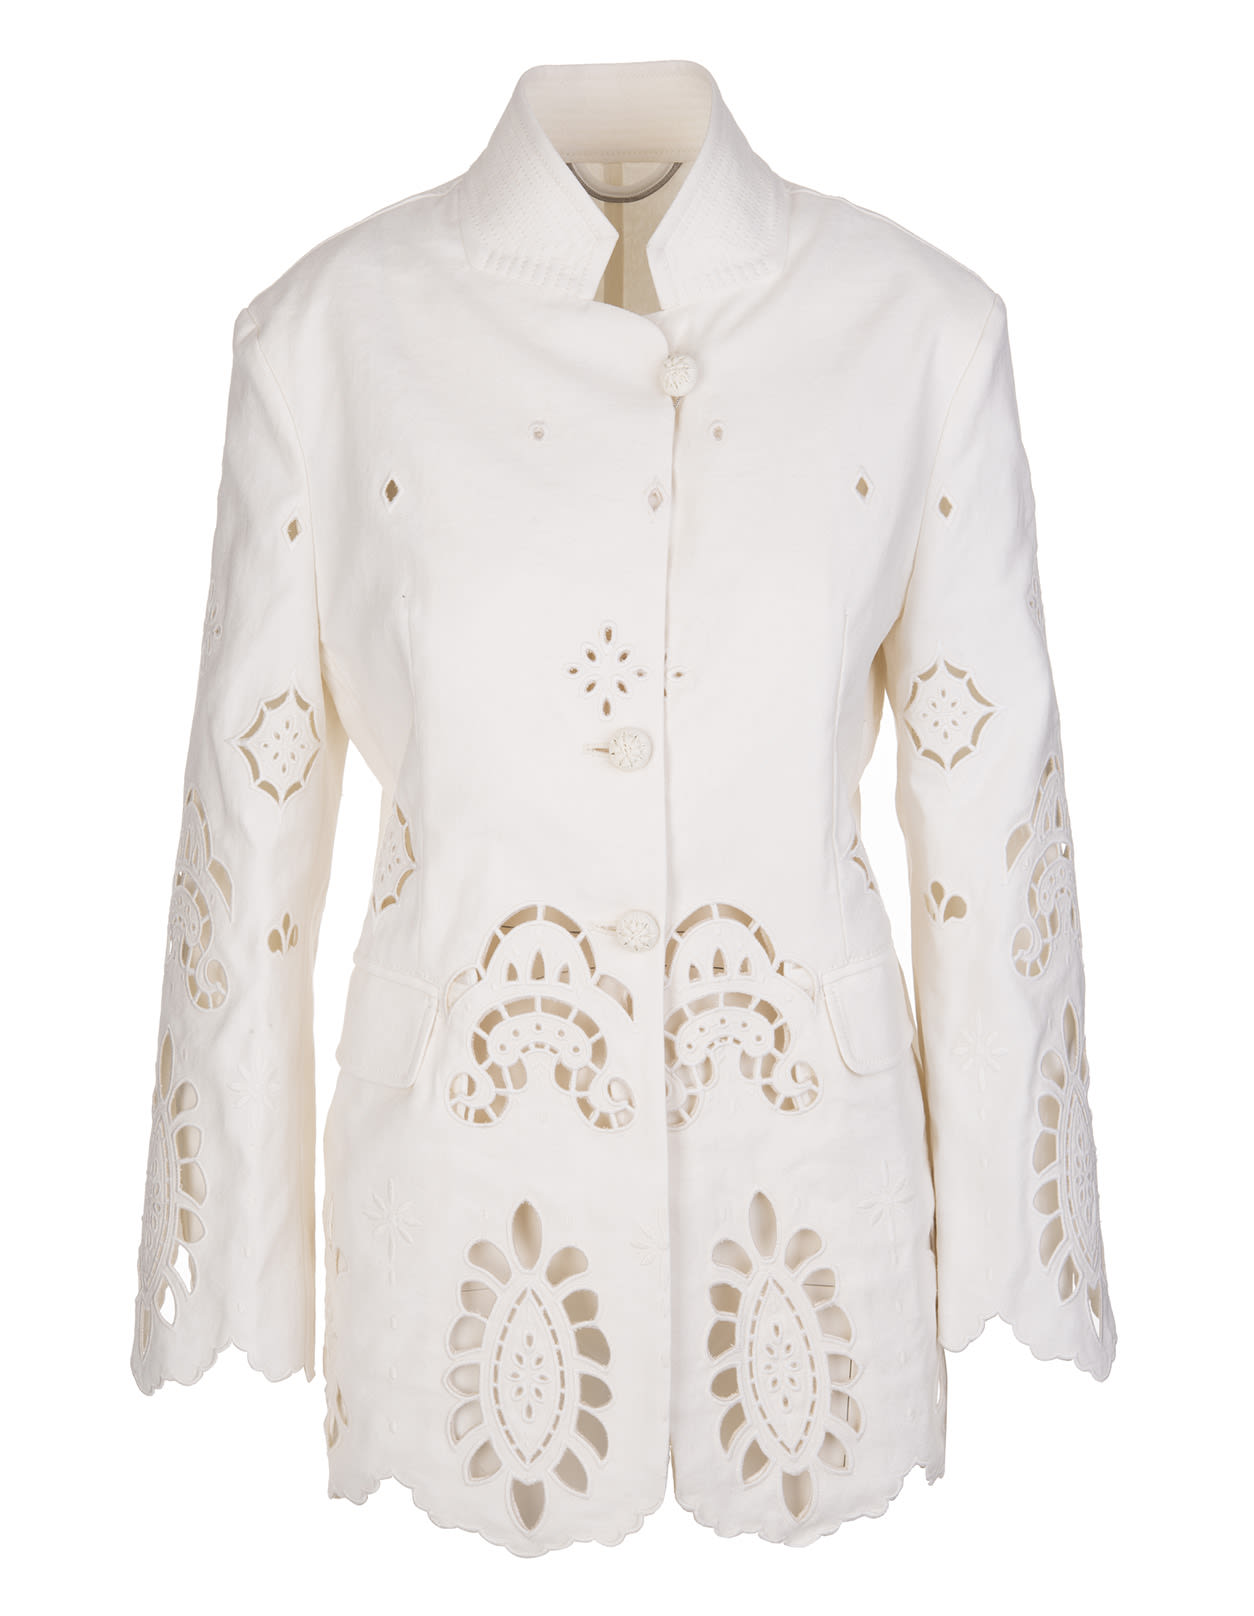 Ermanno Scervino White Single Breasted Jacket With Carved Embroidery